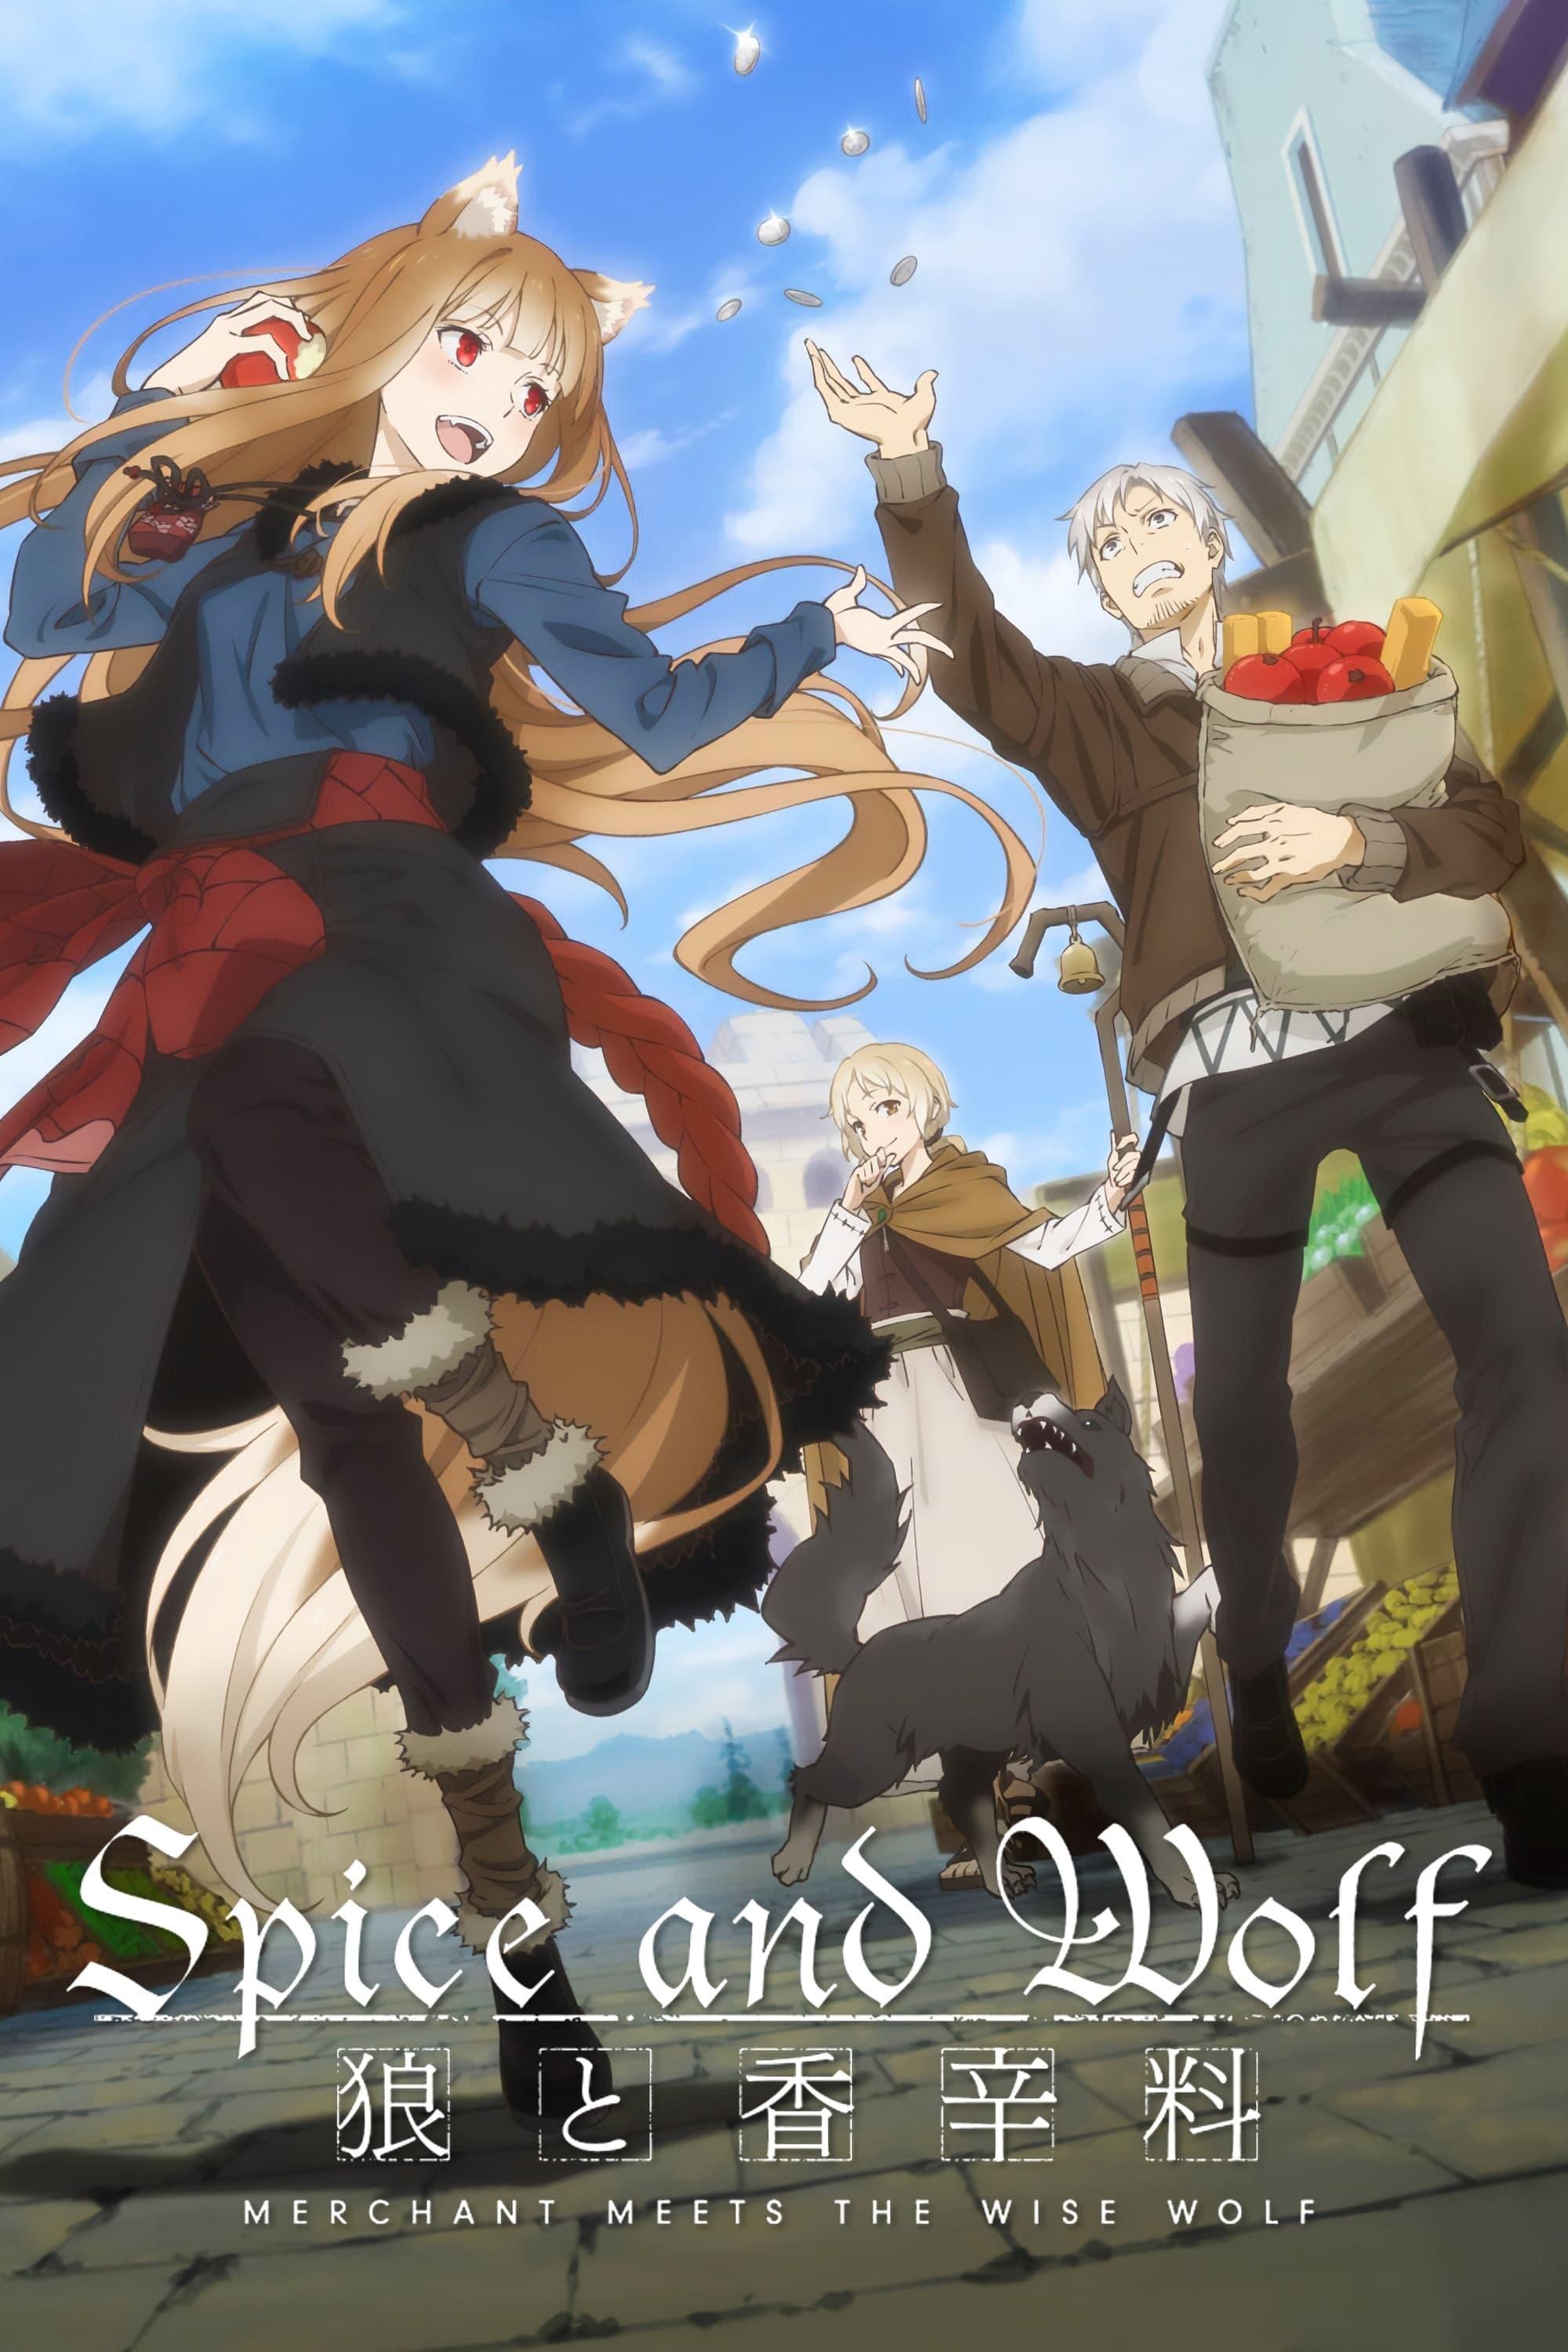 Spice and Wolf Merchant Meets the Wise Wolf Anime Poster